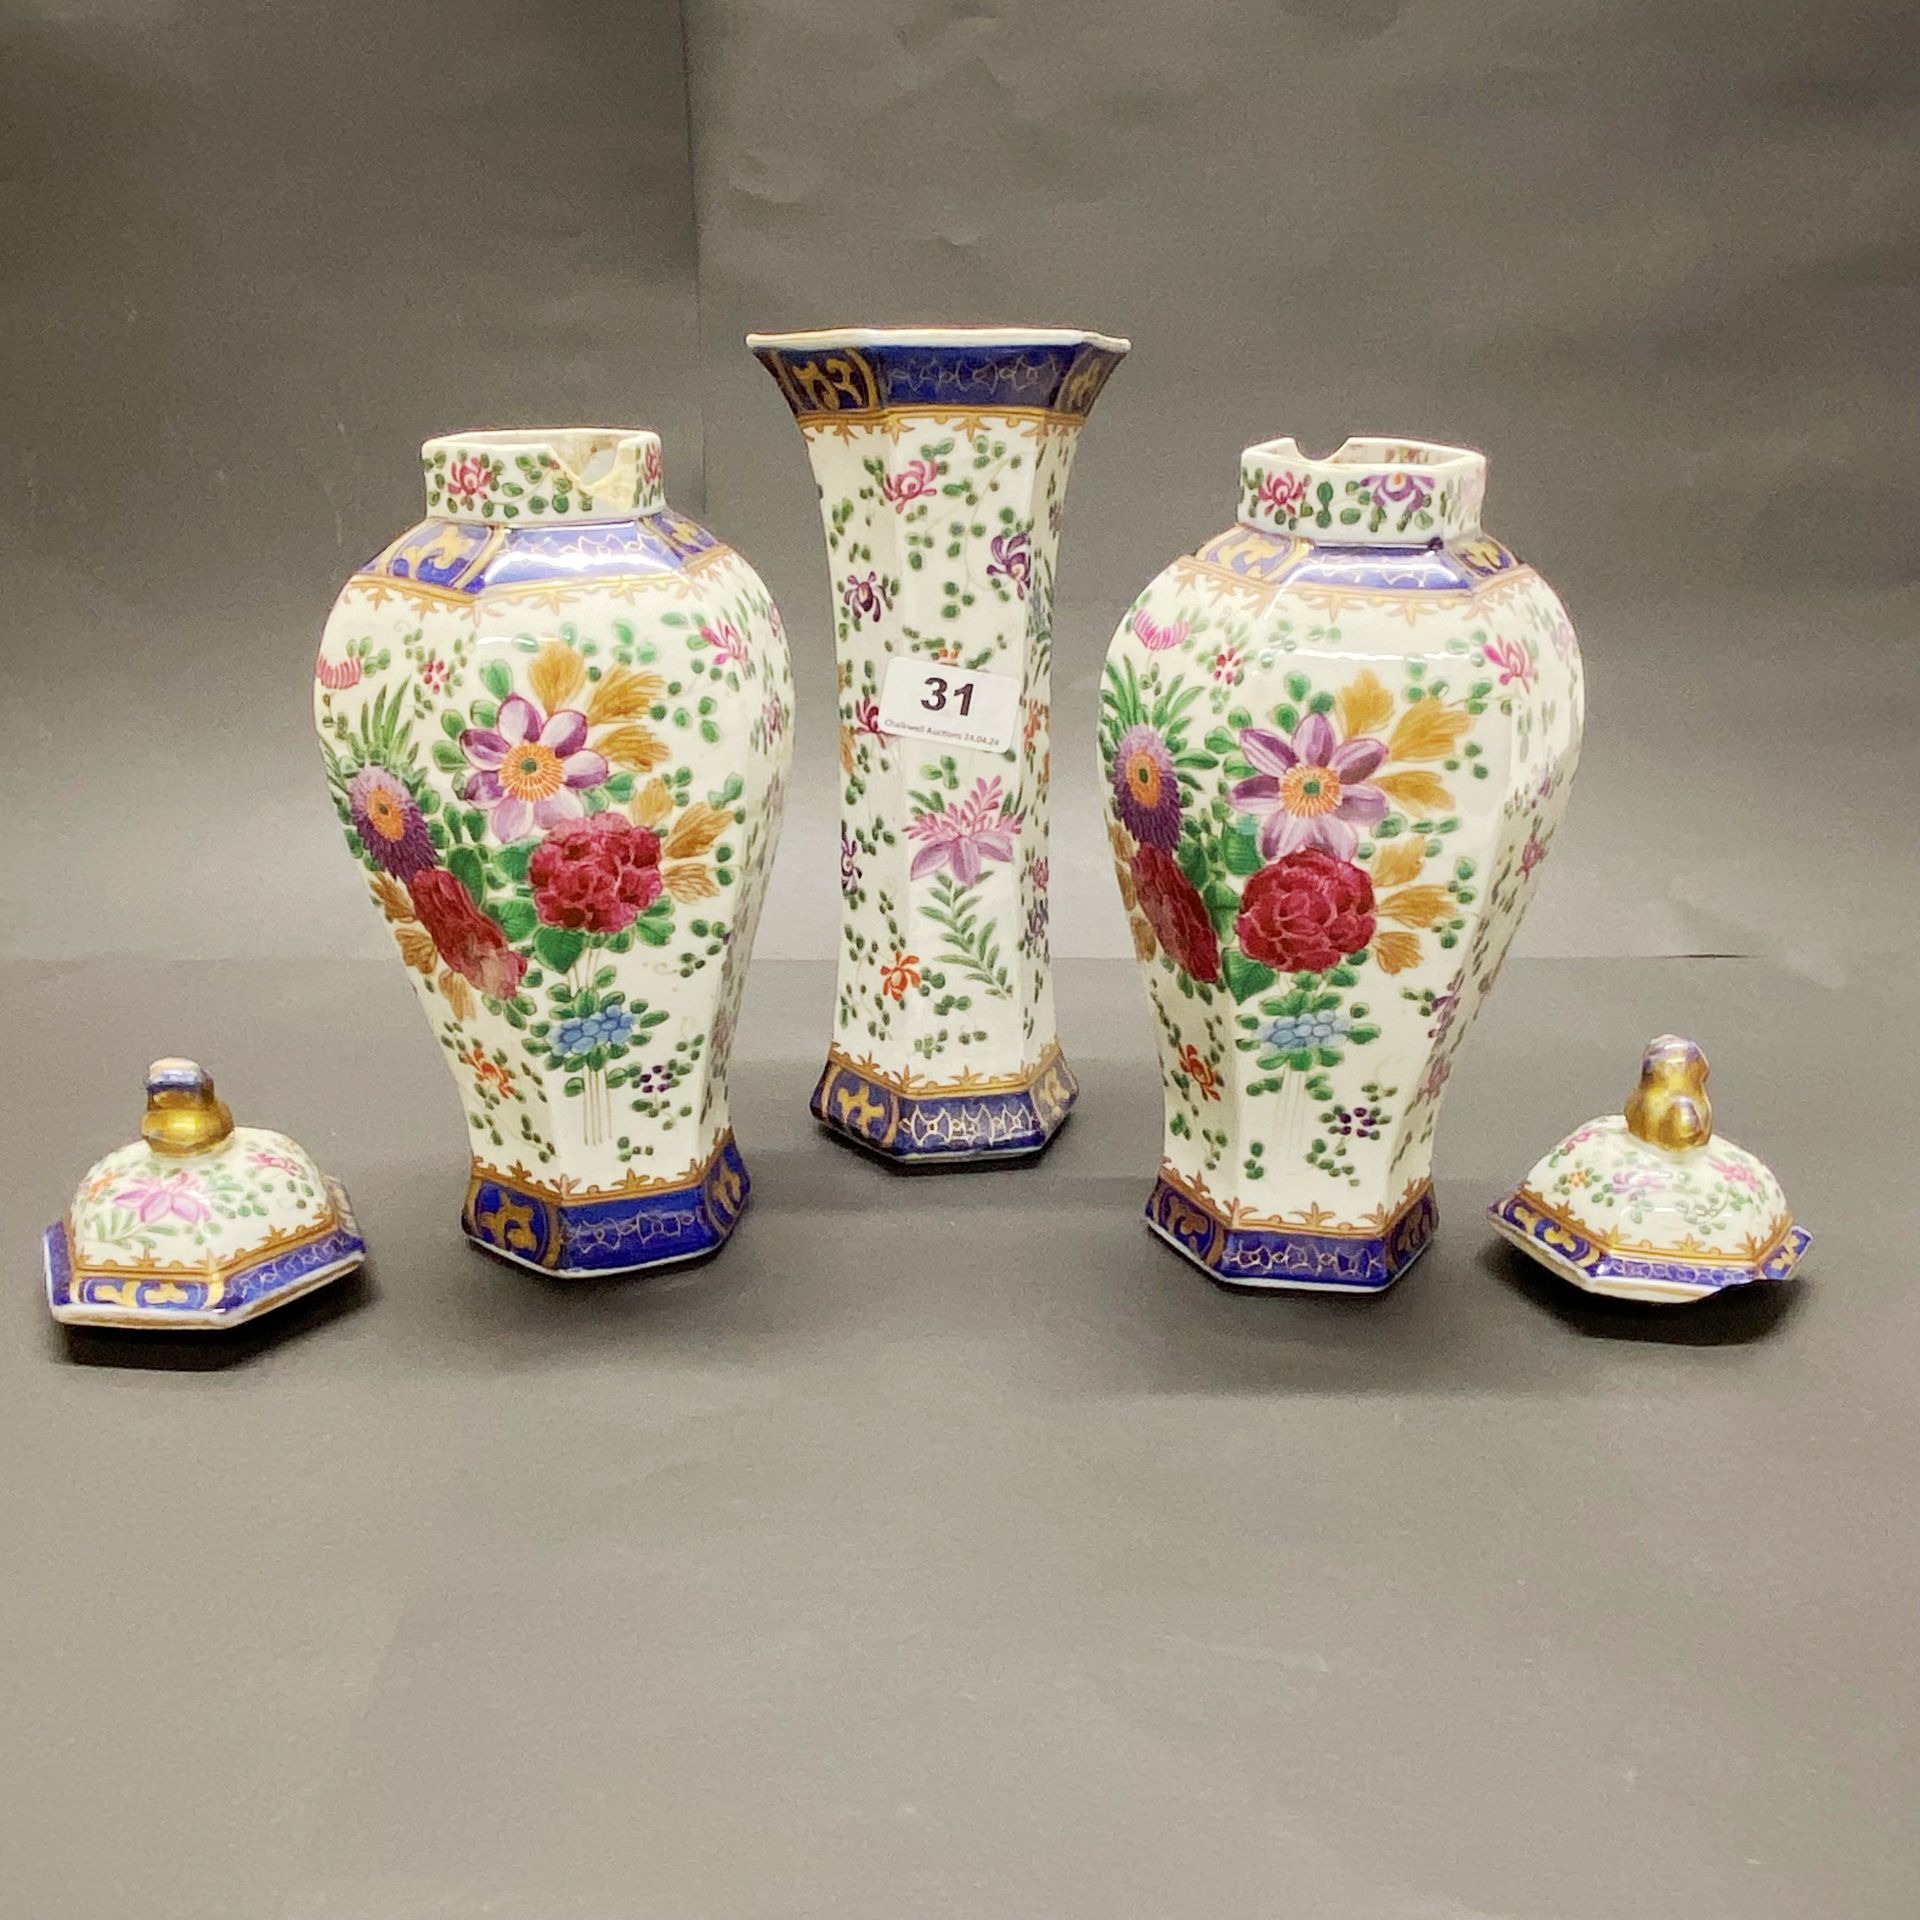 A 19thC Chinese porcelain garniture together with a large 19thC Chinese porcelain vase (exstensively - Image 3 of 5